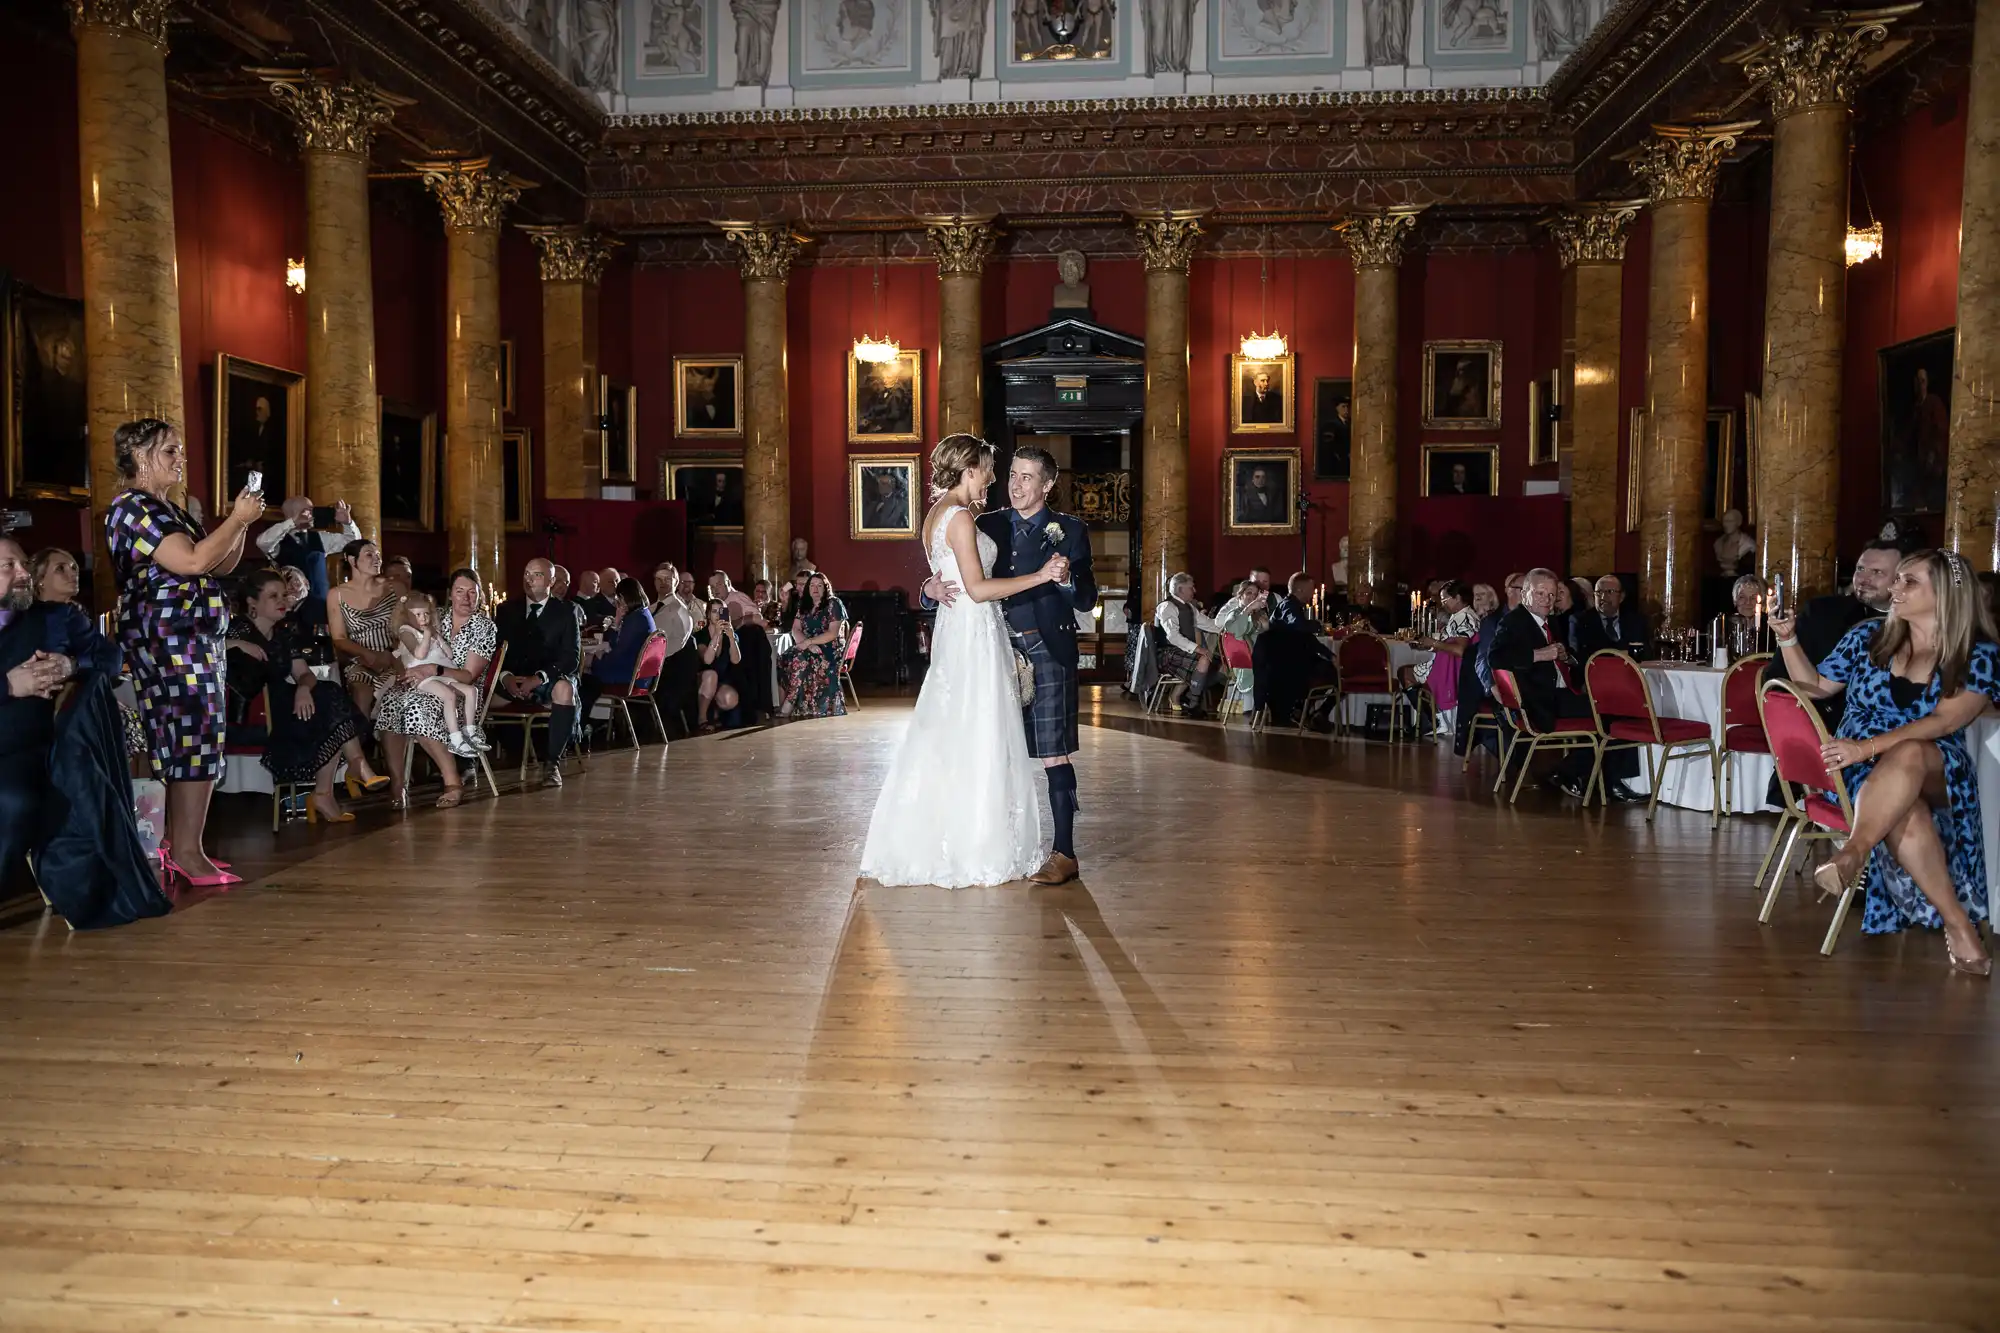 A bride and groom are dancing in a grand hall with guests seated on either side, watching and taking photos. The room features ornate columns, red walls, and framed paintings.